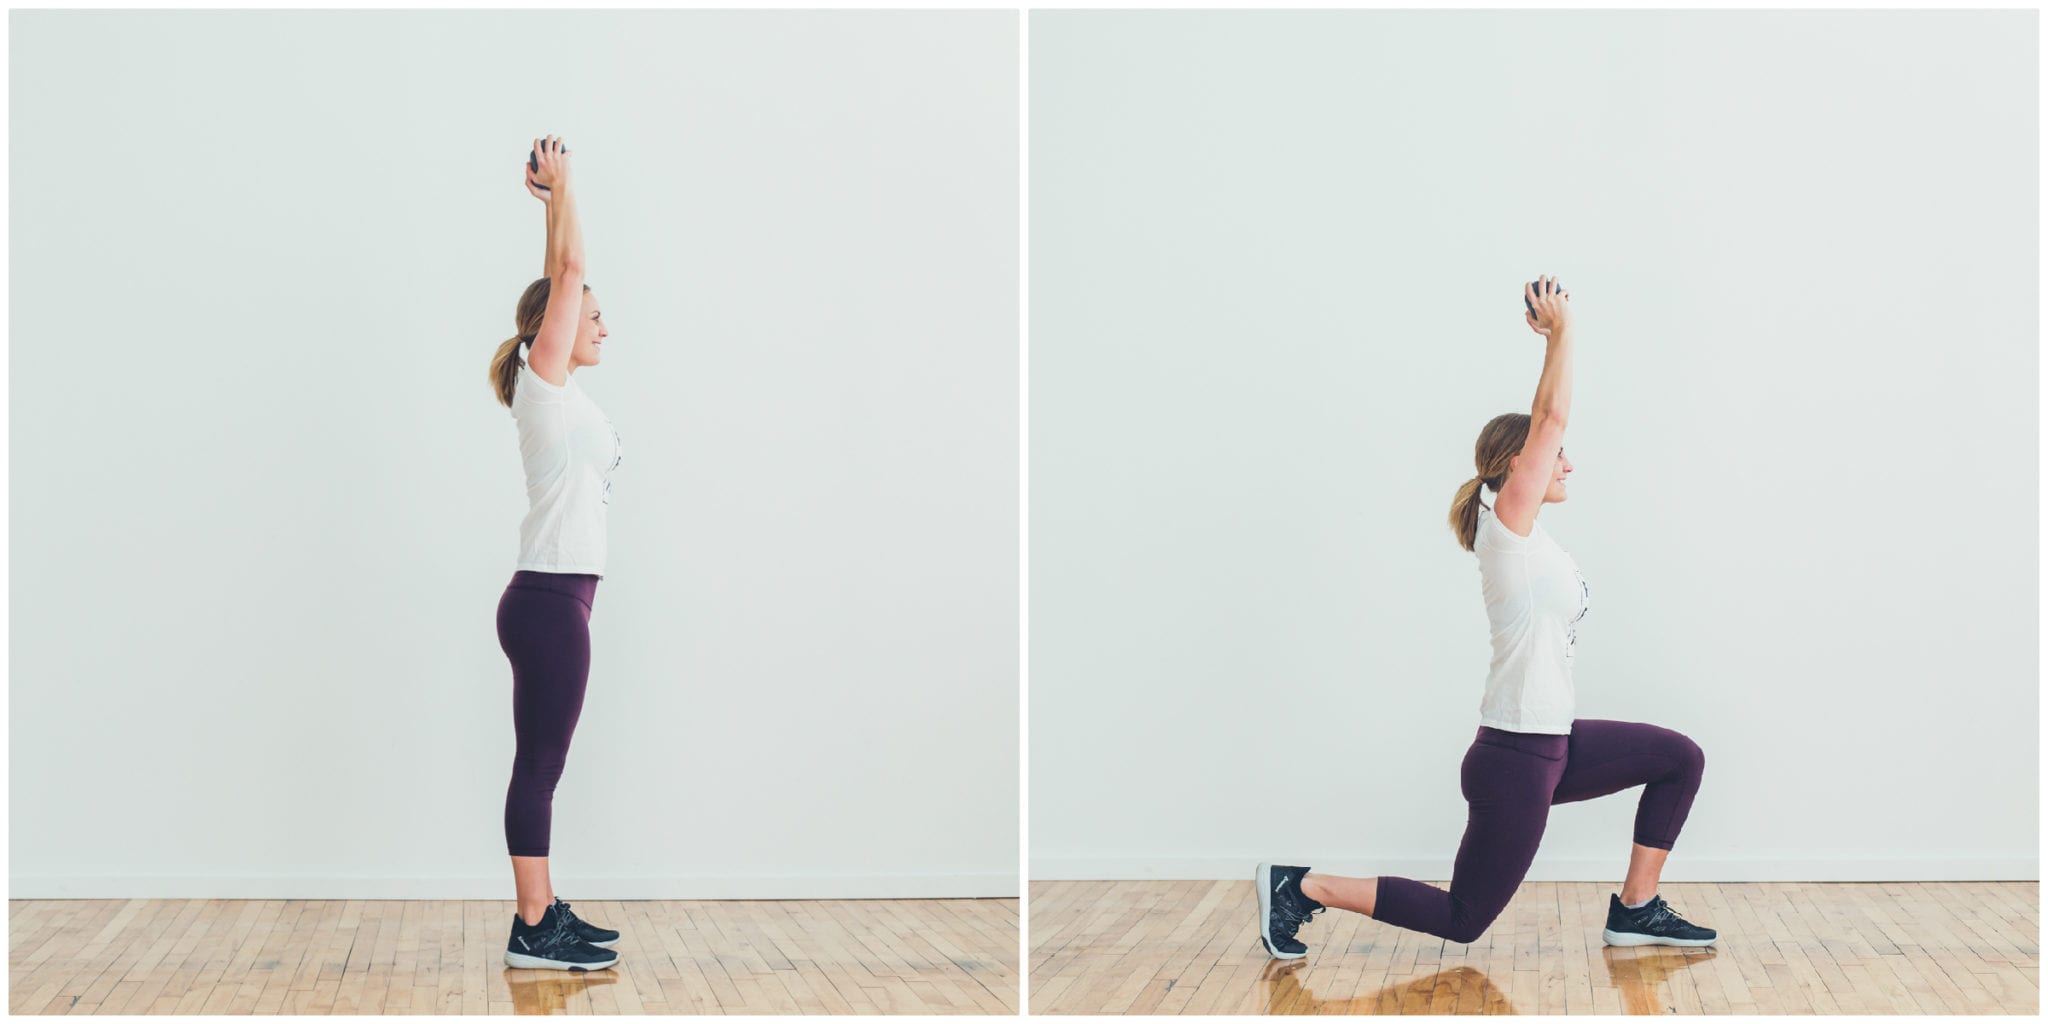 8 Movements That Can Get Your Body In Shape In A Short Time By Taking 10 Minutes Every Day 3